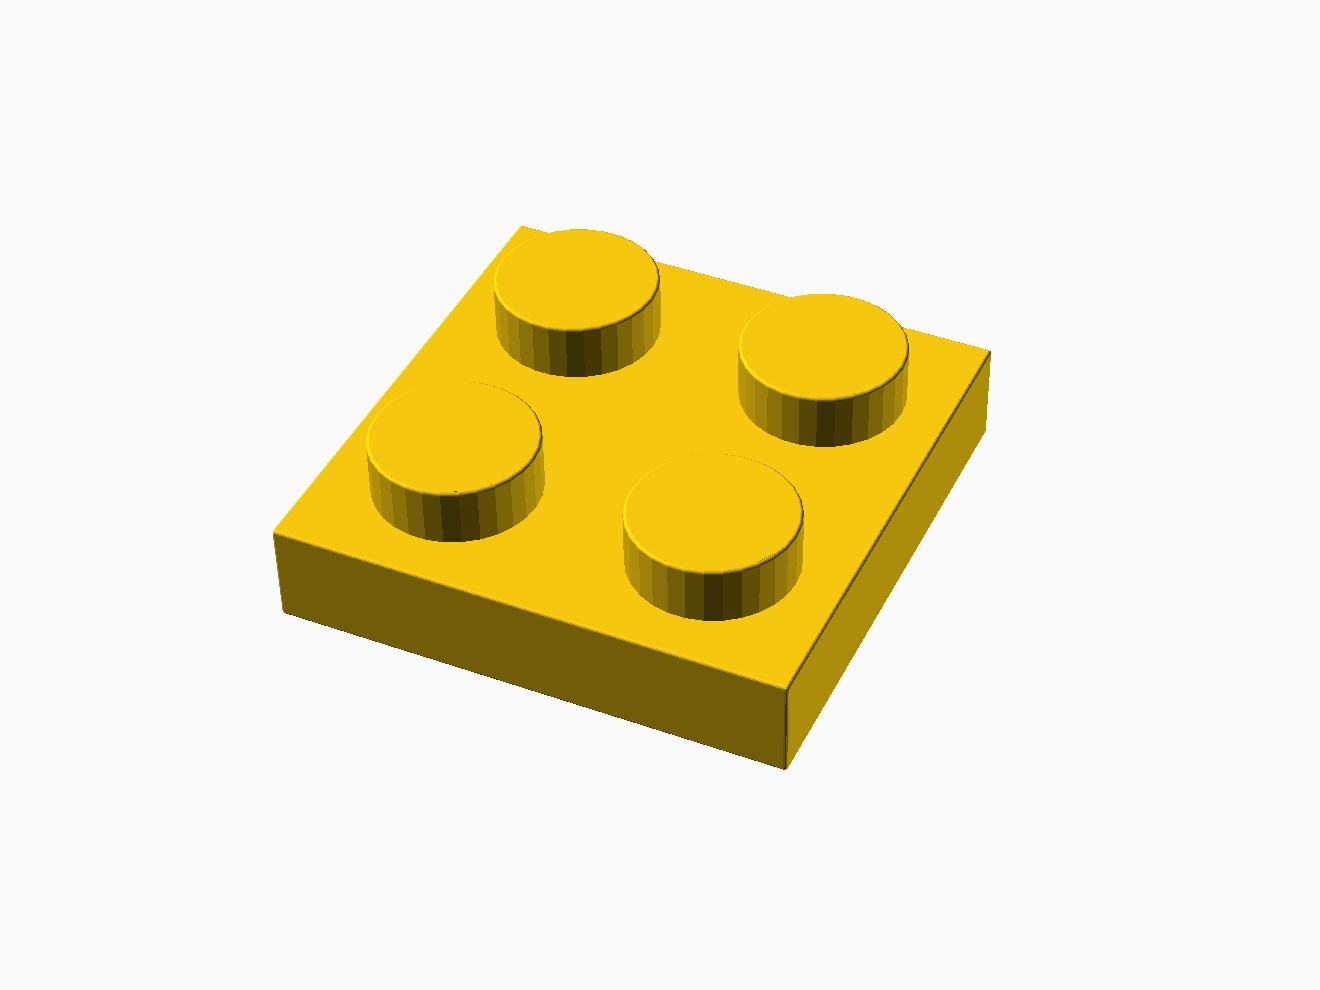 3D printable model of a LEGO 2x2 Plate with standard knobs.